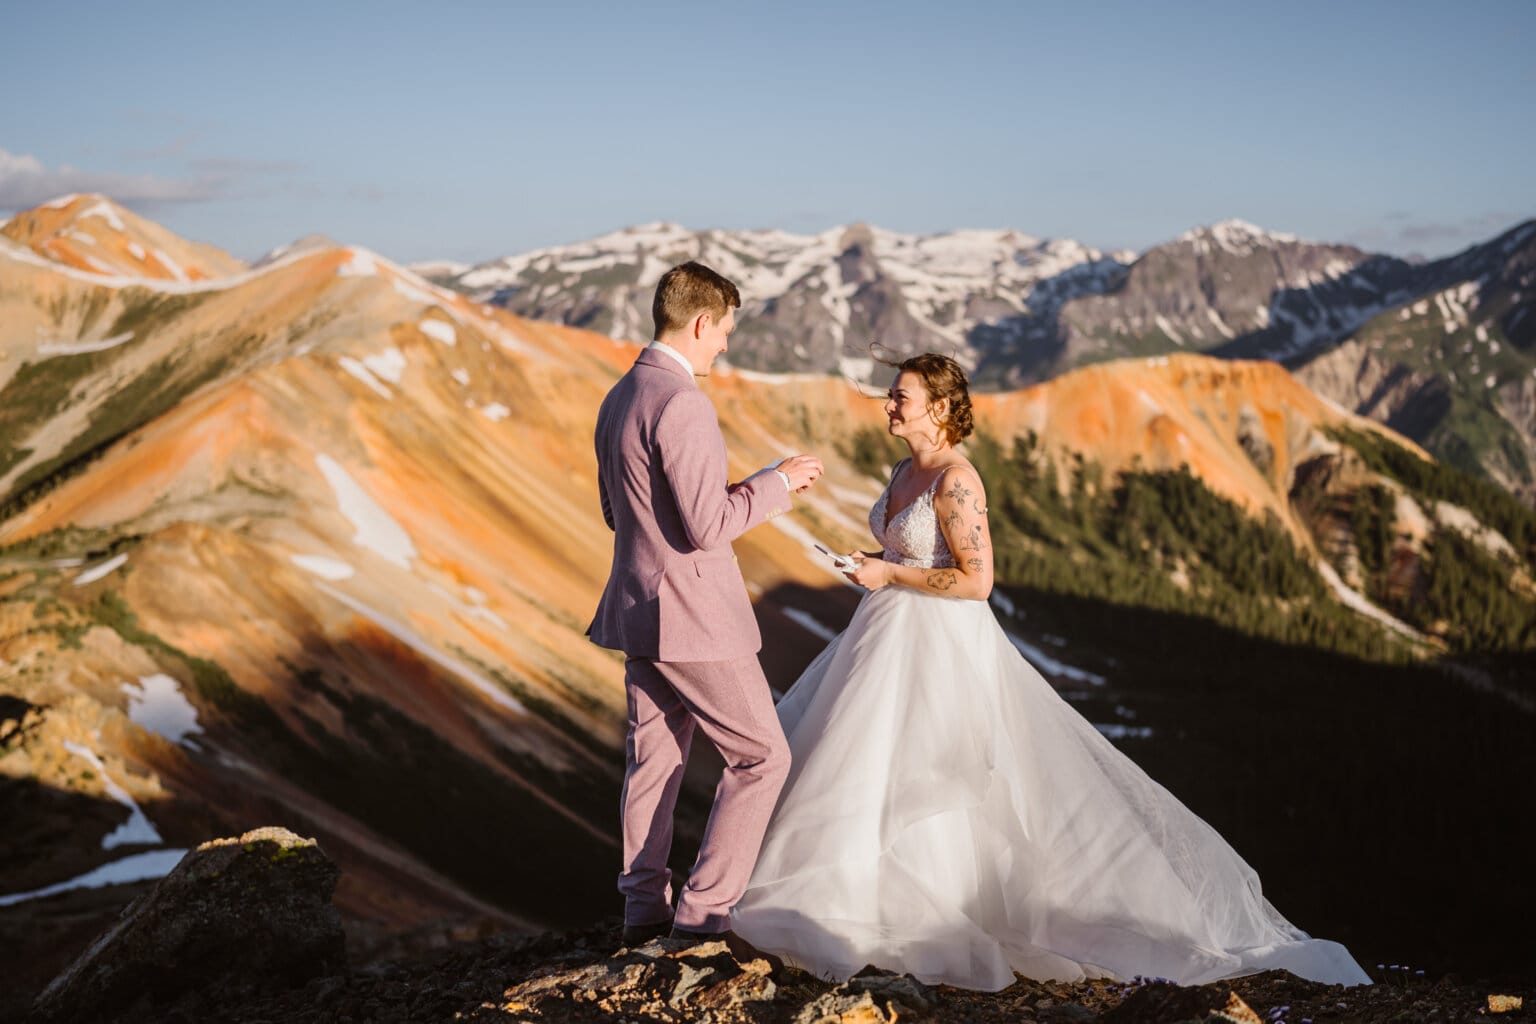 A couple sharing their vows in the San Juan mountains for their Self-Solemnization elopement in Colorado.